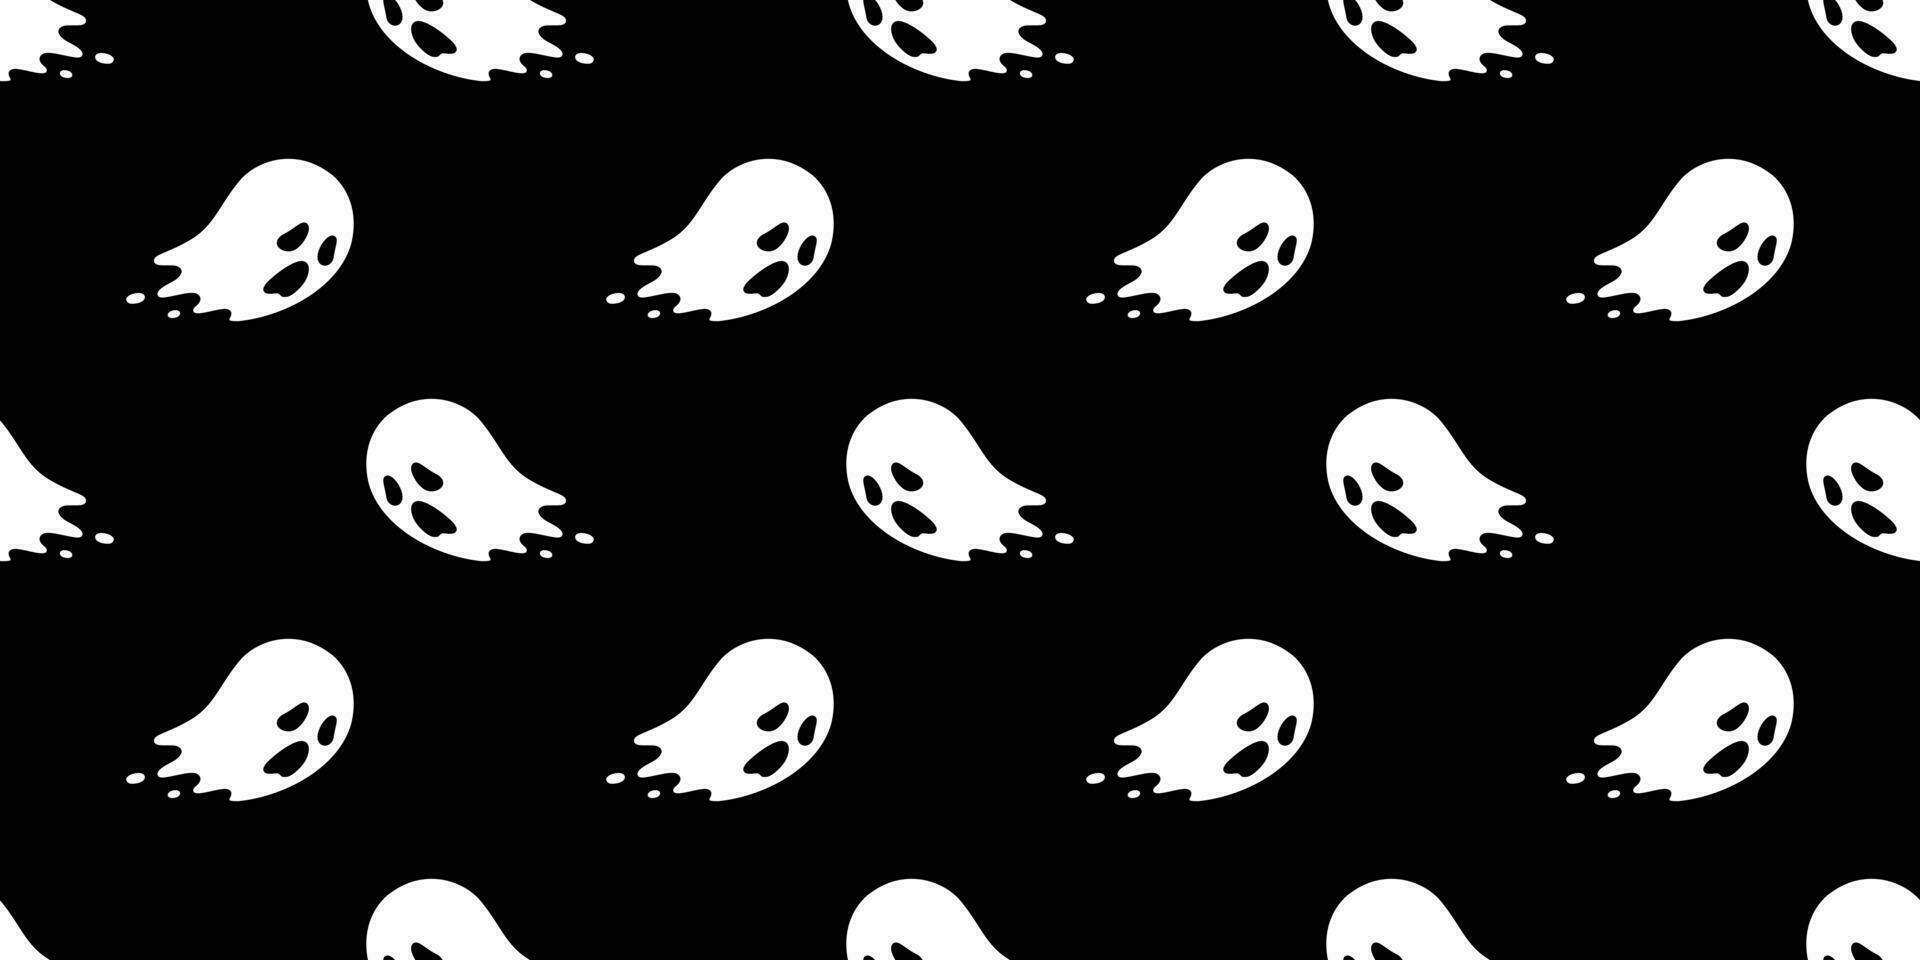 Ghost seamless pattern vector Halloween spooky repeat wallpaper scarf isolated tile background devil evil cartoon illustration doodle gift wrap paper design